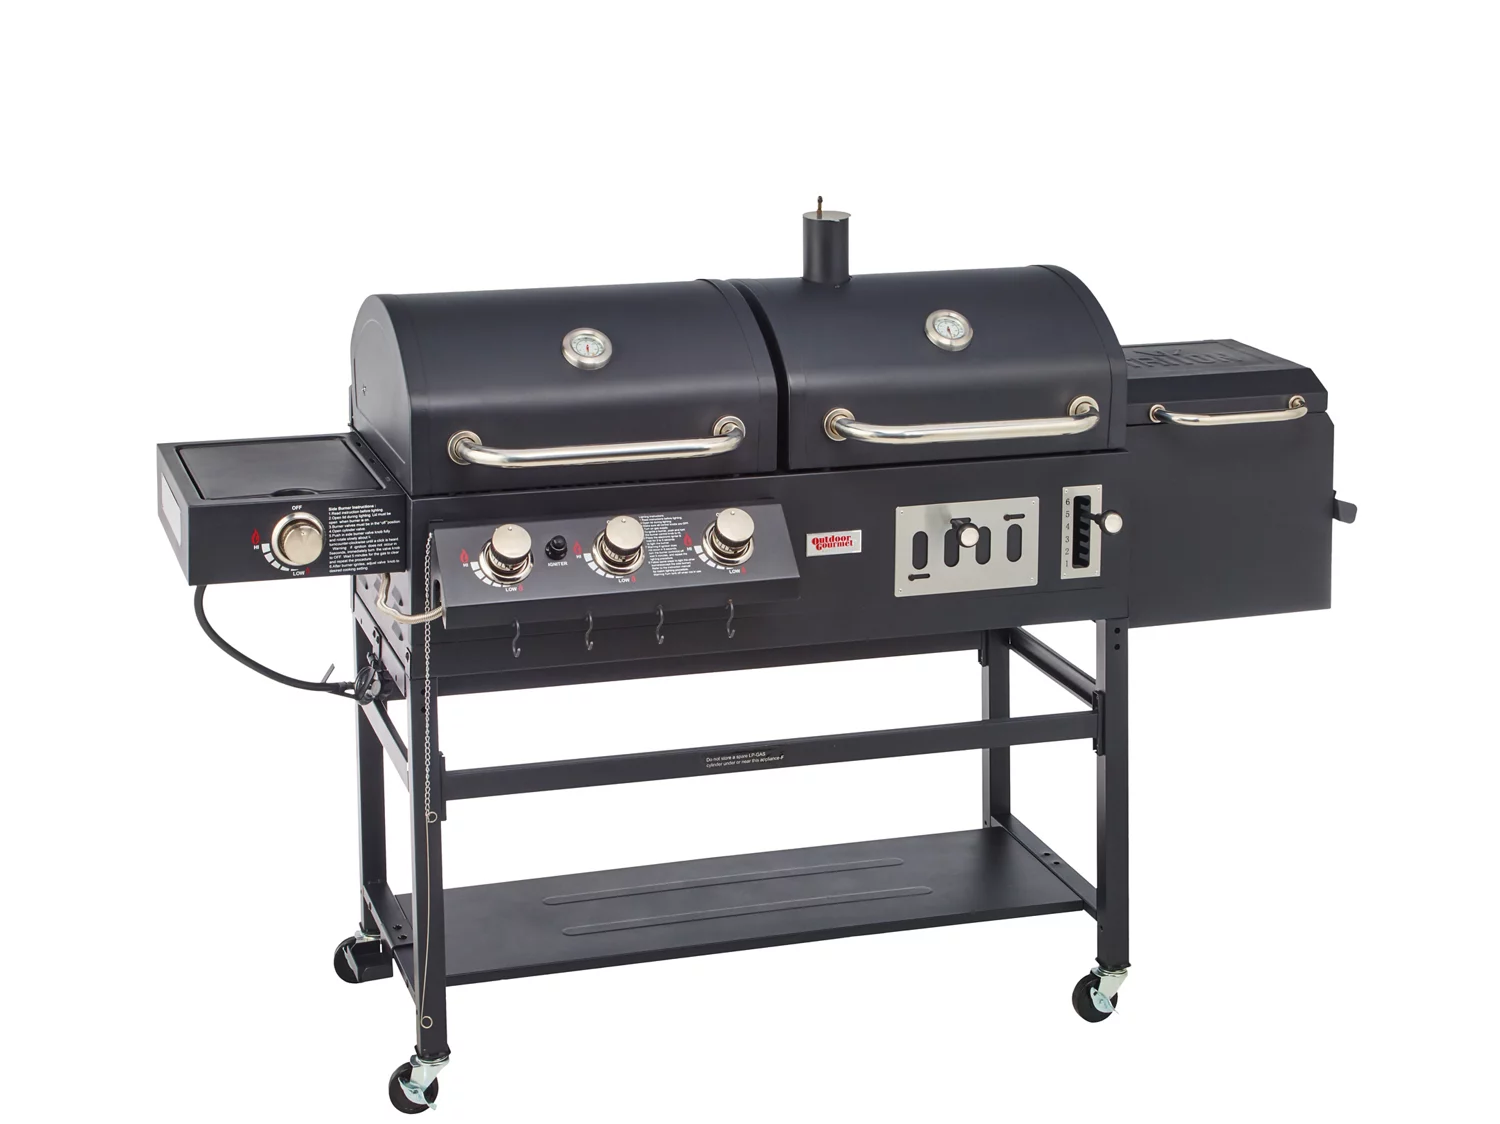 Outdoor Gourmet Pro Triton Classic GasCharcoal Grill and Smoker Box